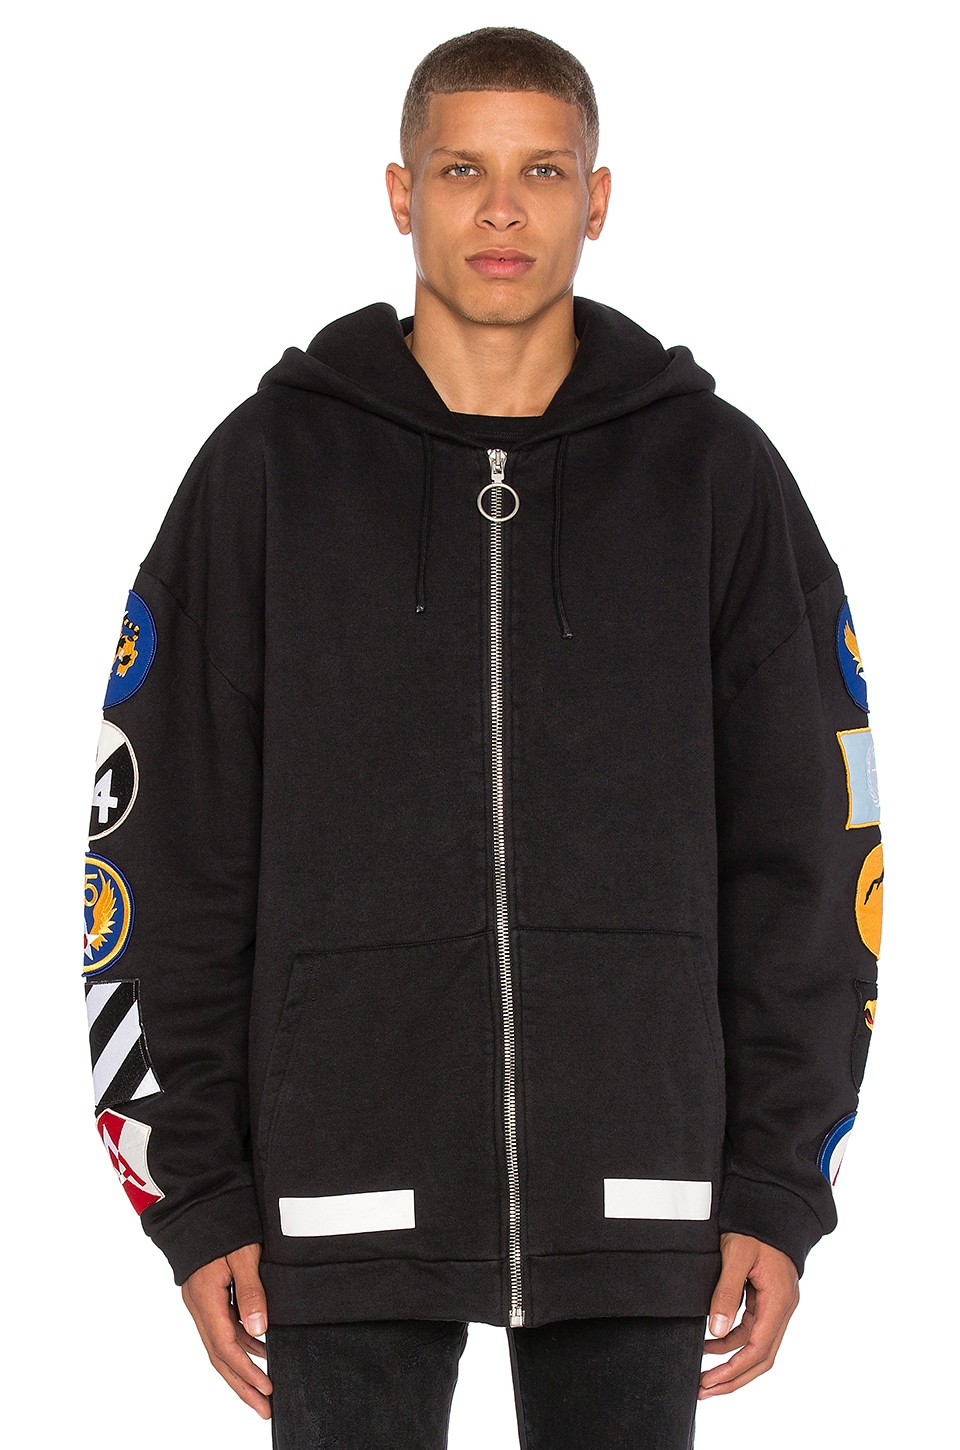 OFF-WHITE Hoodie With Patches in Black & White | REVOLVE